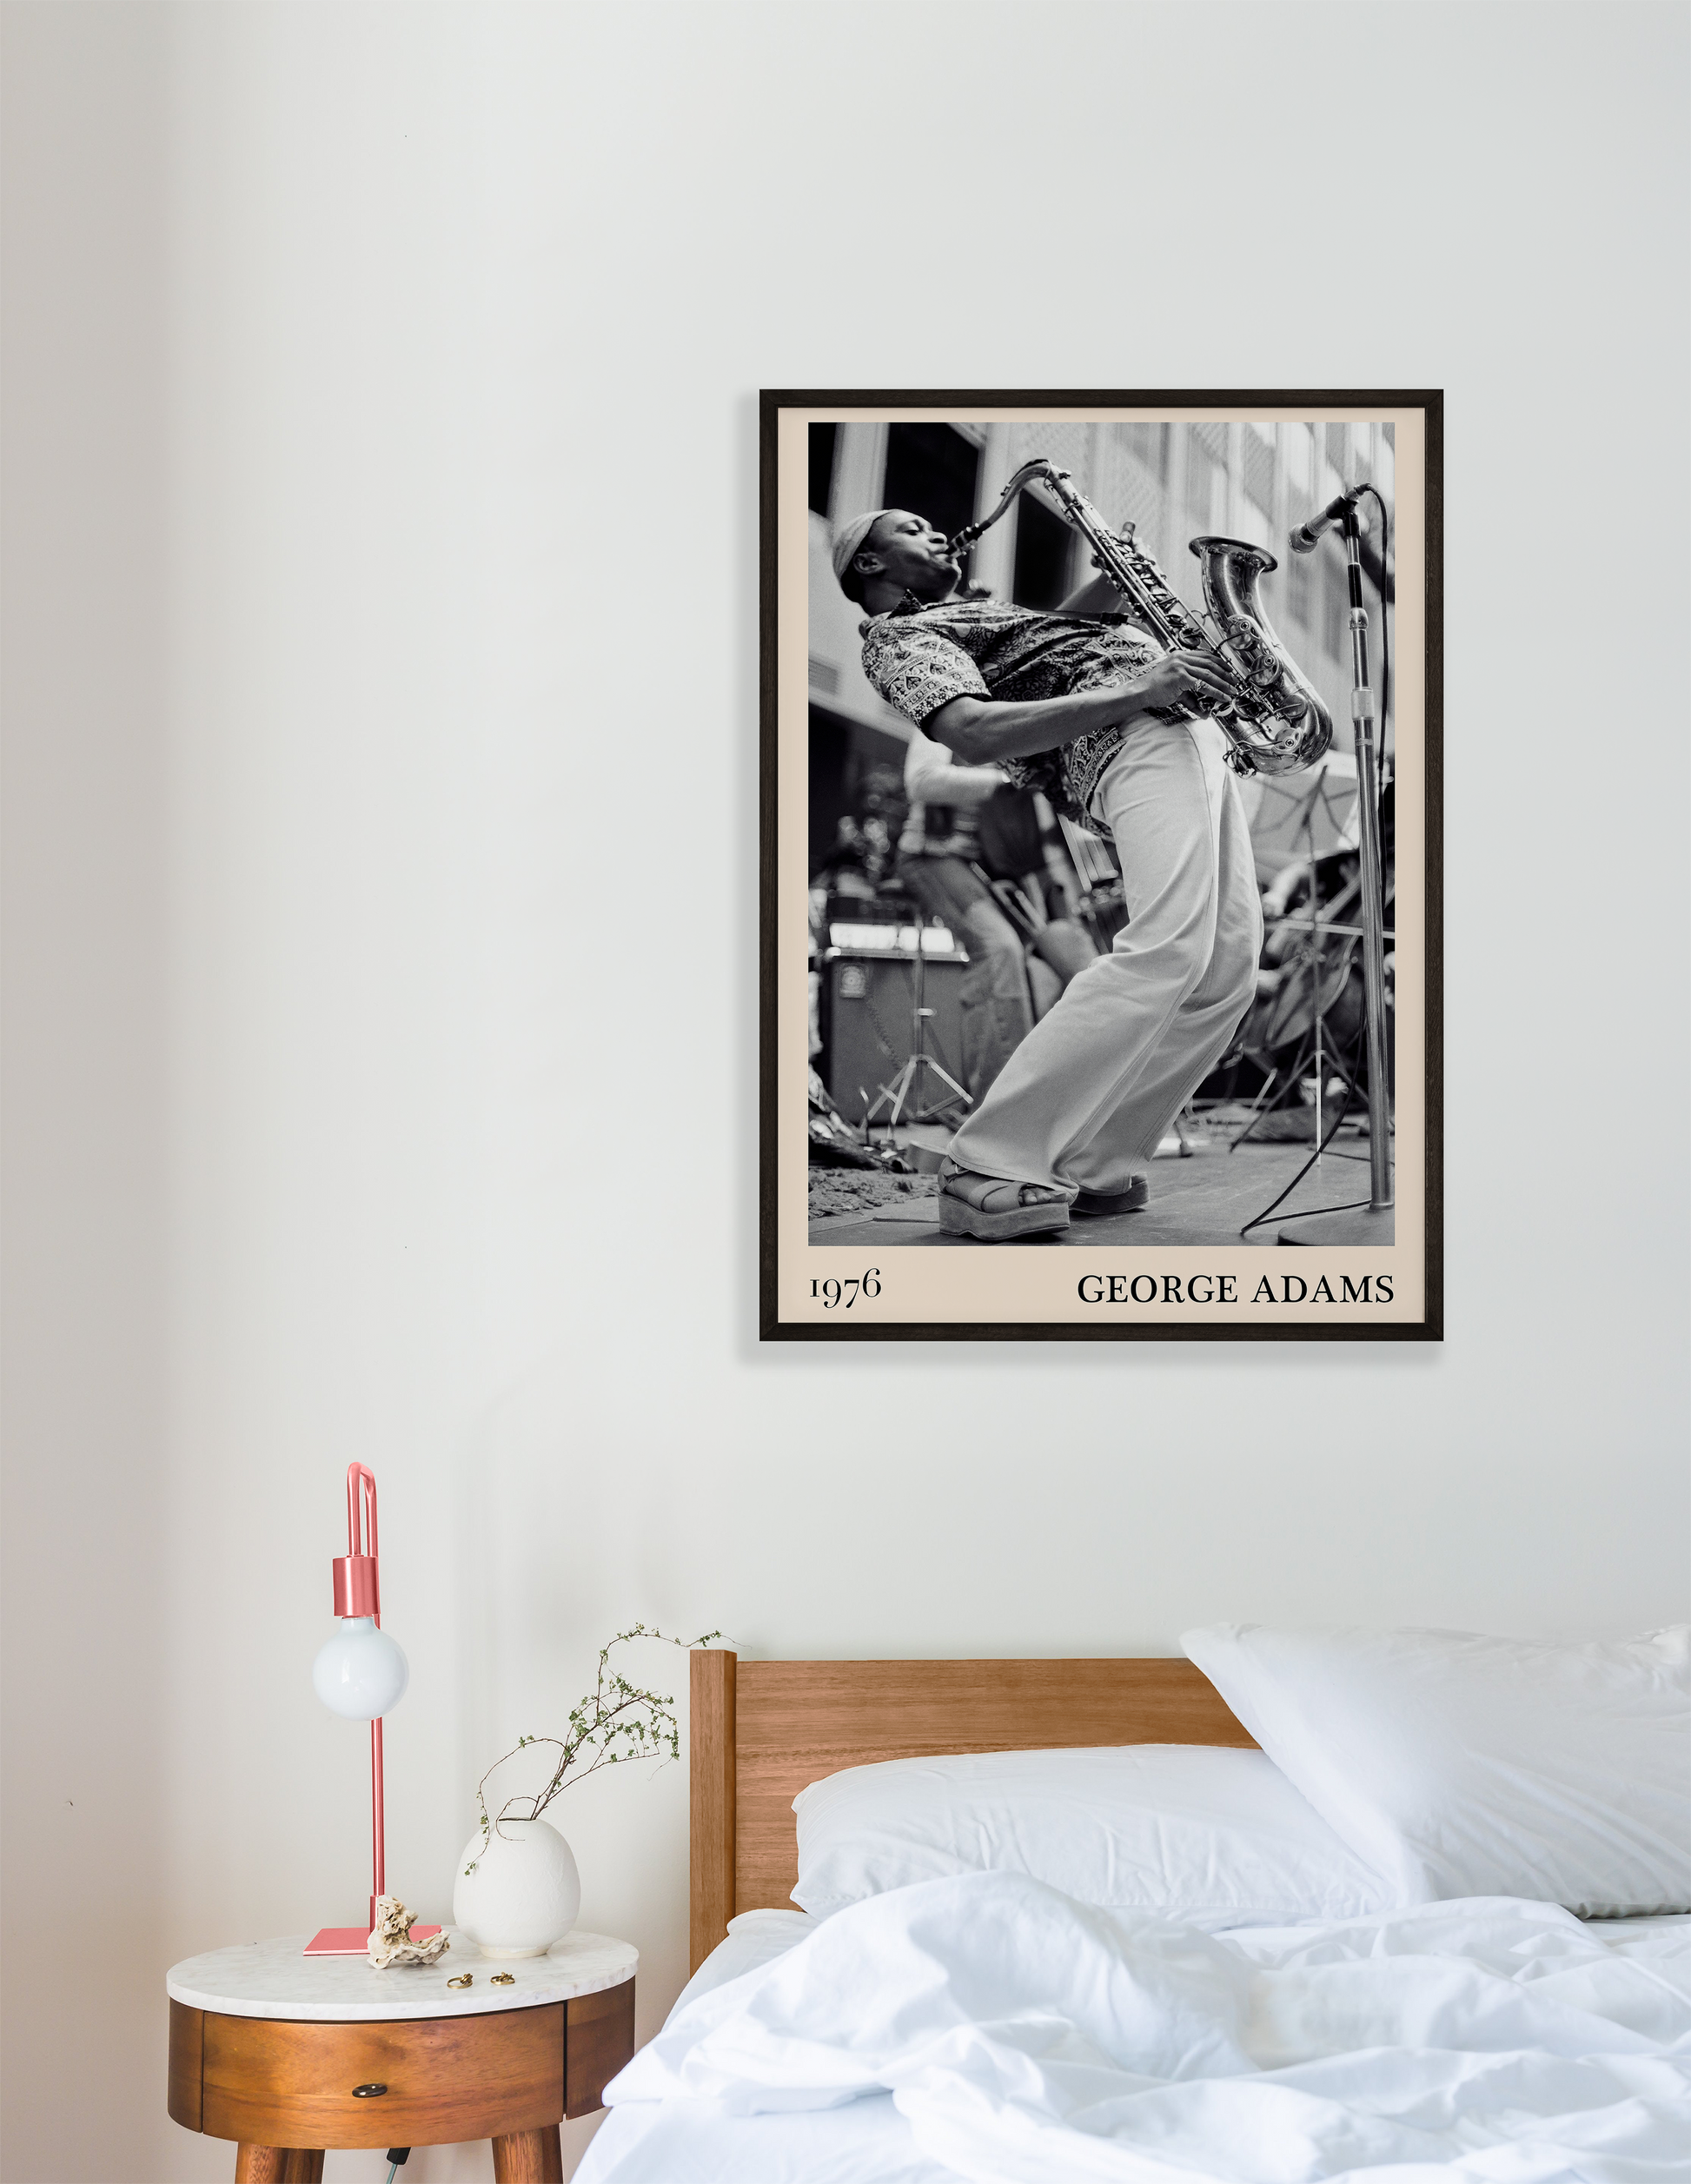 1976 photograph of George Adams taken by Thomas Marcello. Picture crafted into a cool black framed jazz print, with an off-white border. Poster is hanging on a white bedroom wall